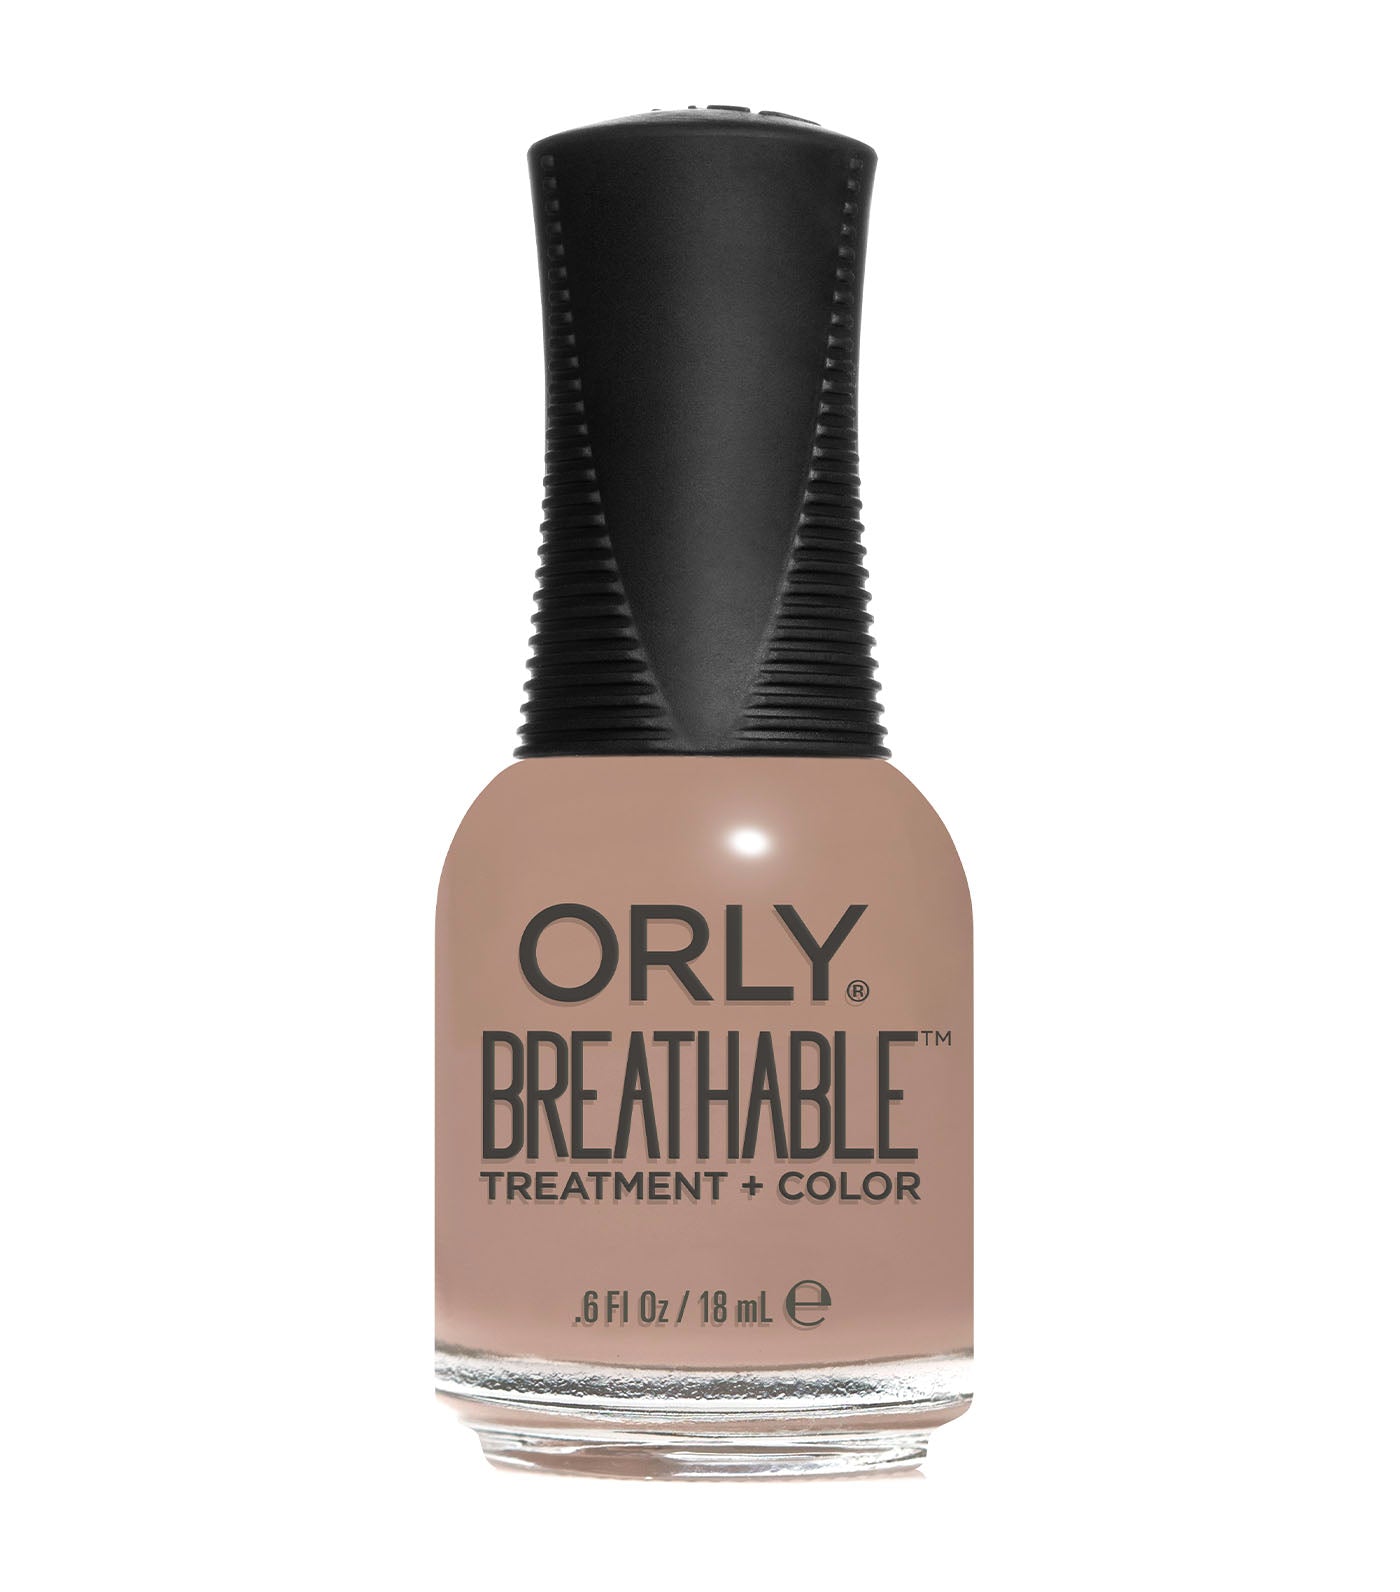 orly down to earth breathable treatment + color